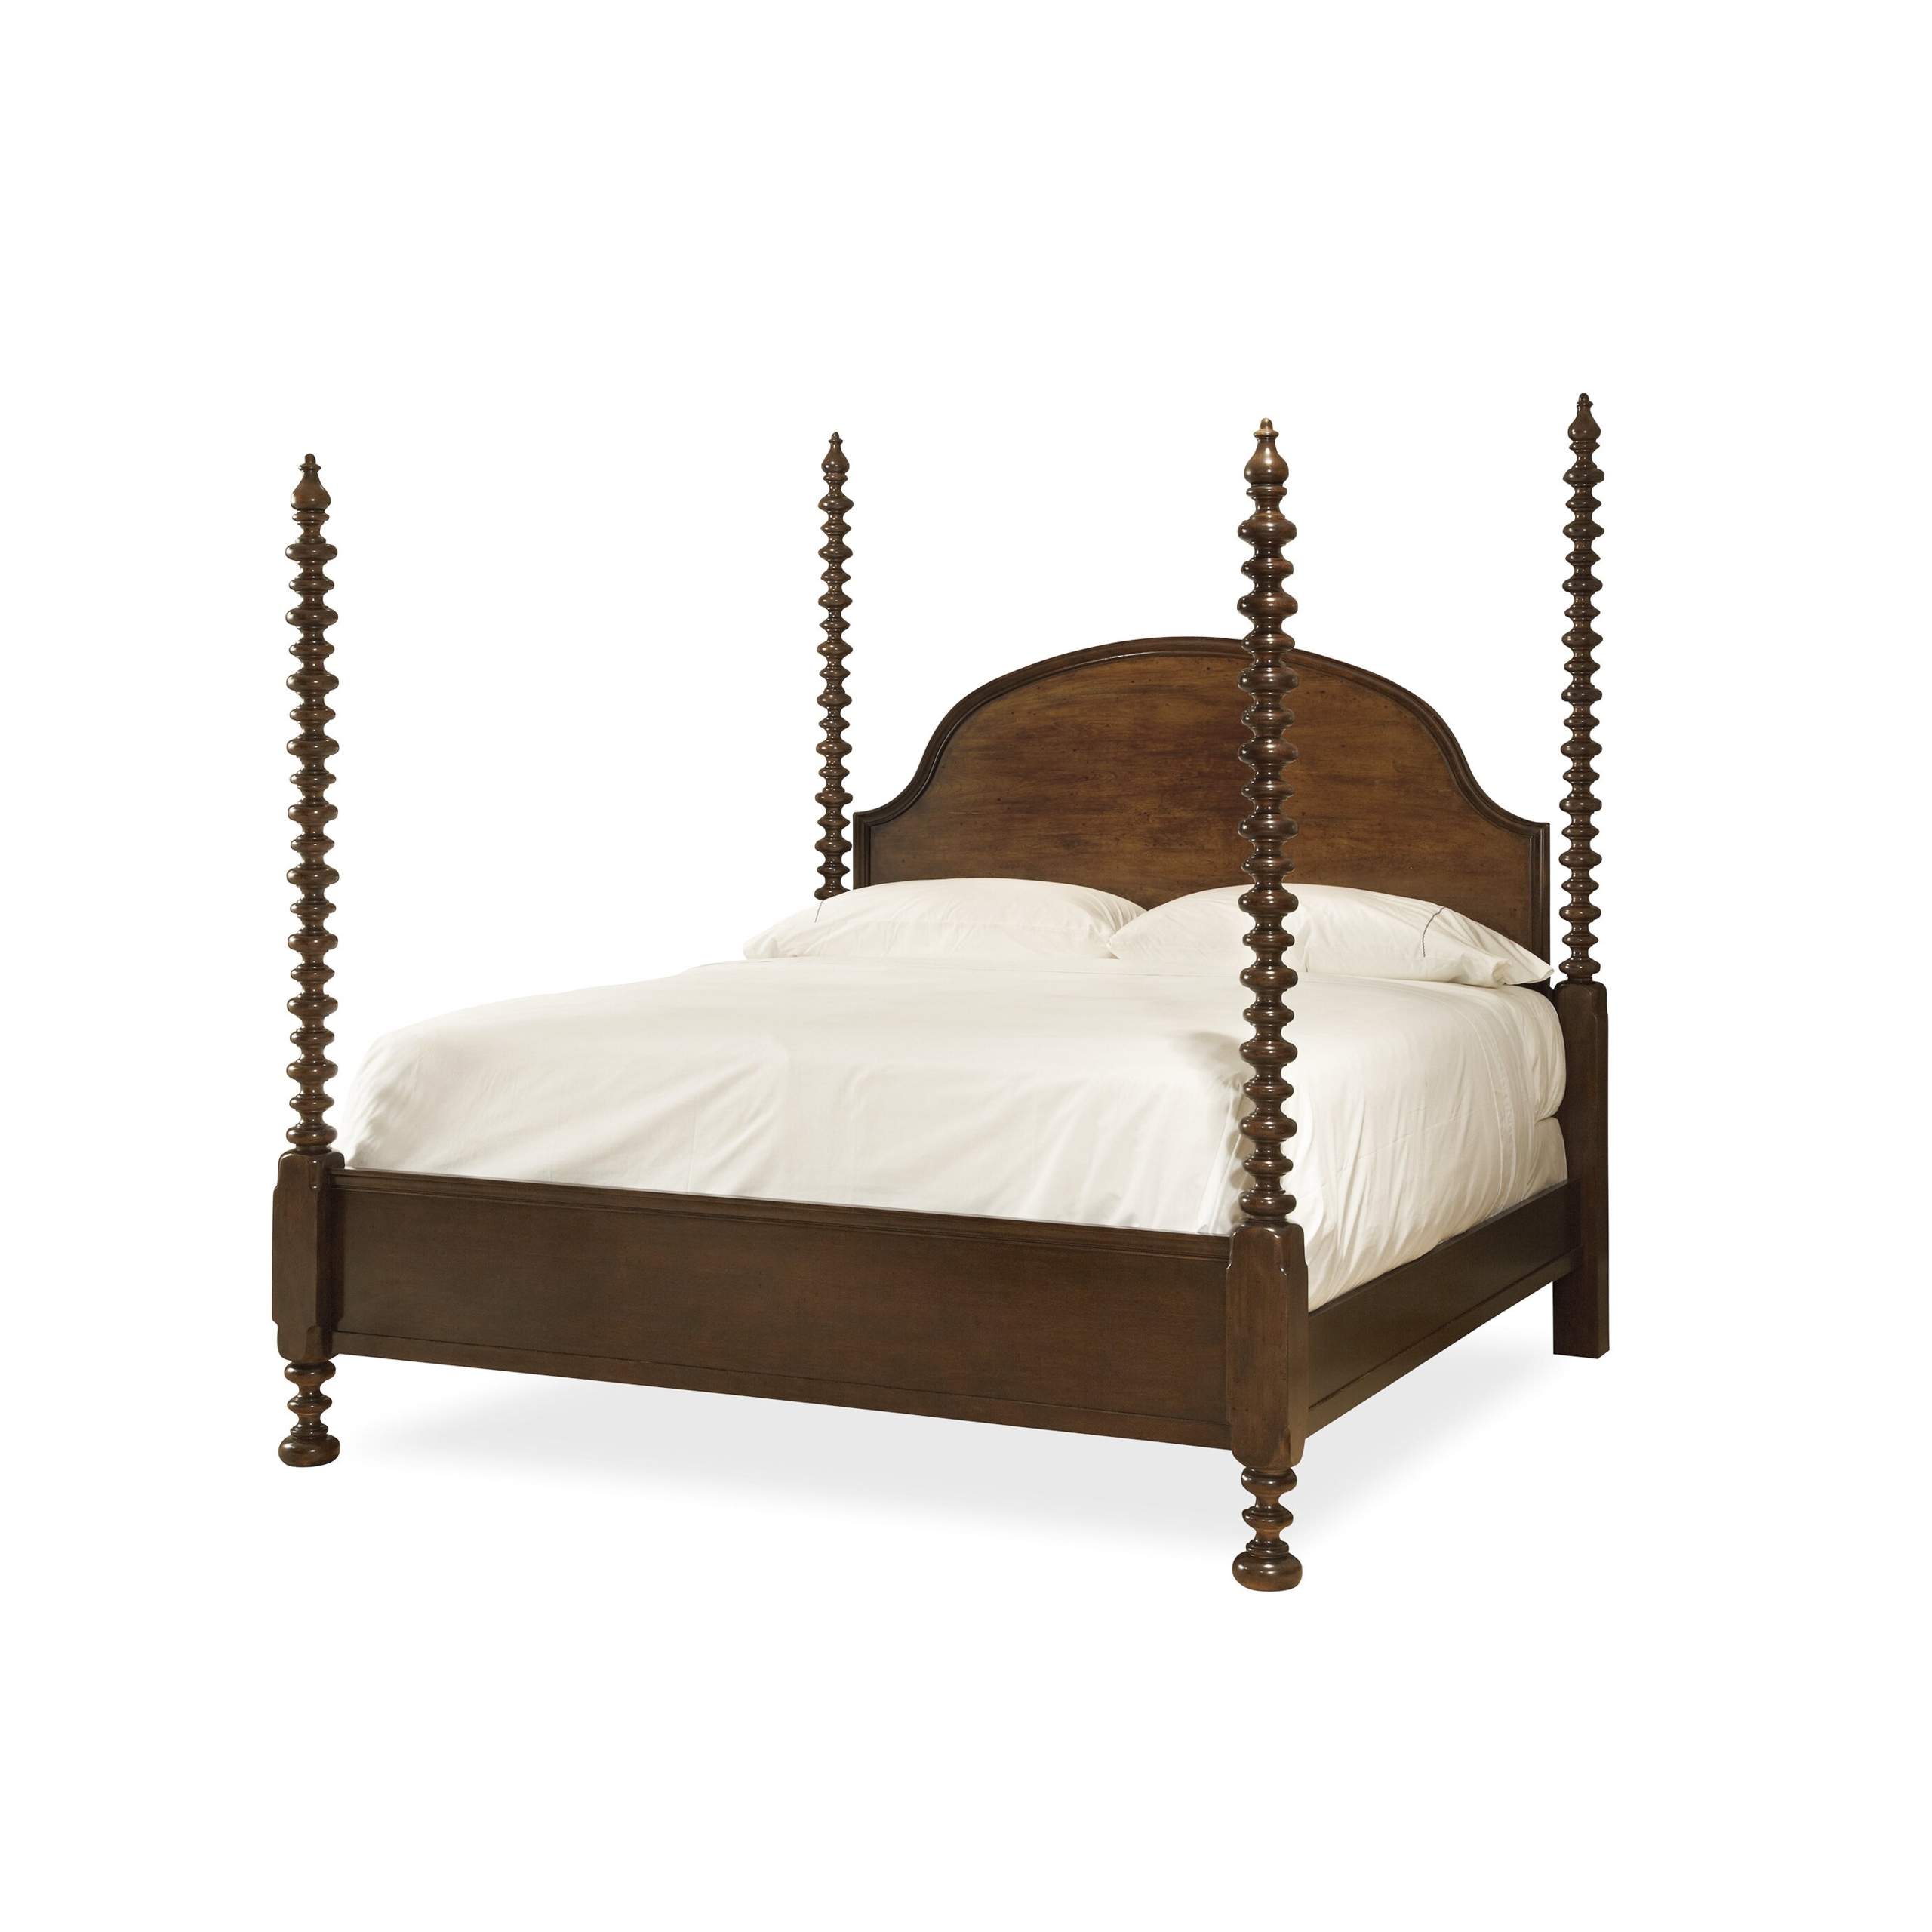 Feminine rustic rutherford queen bed